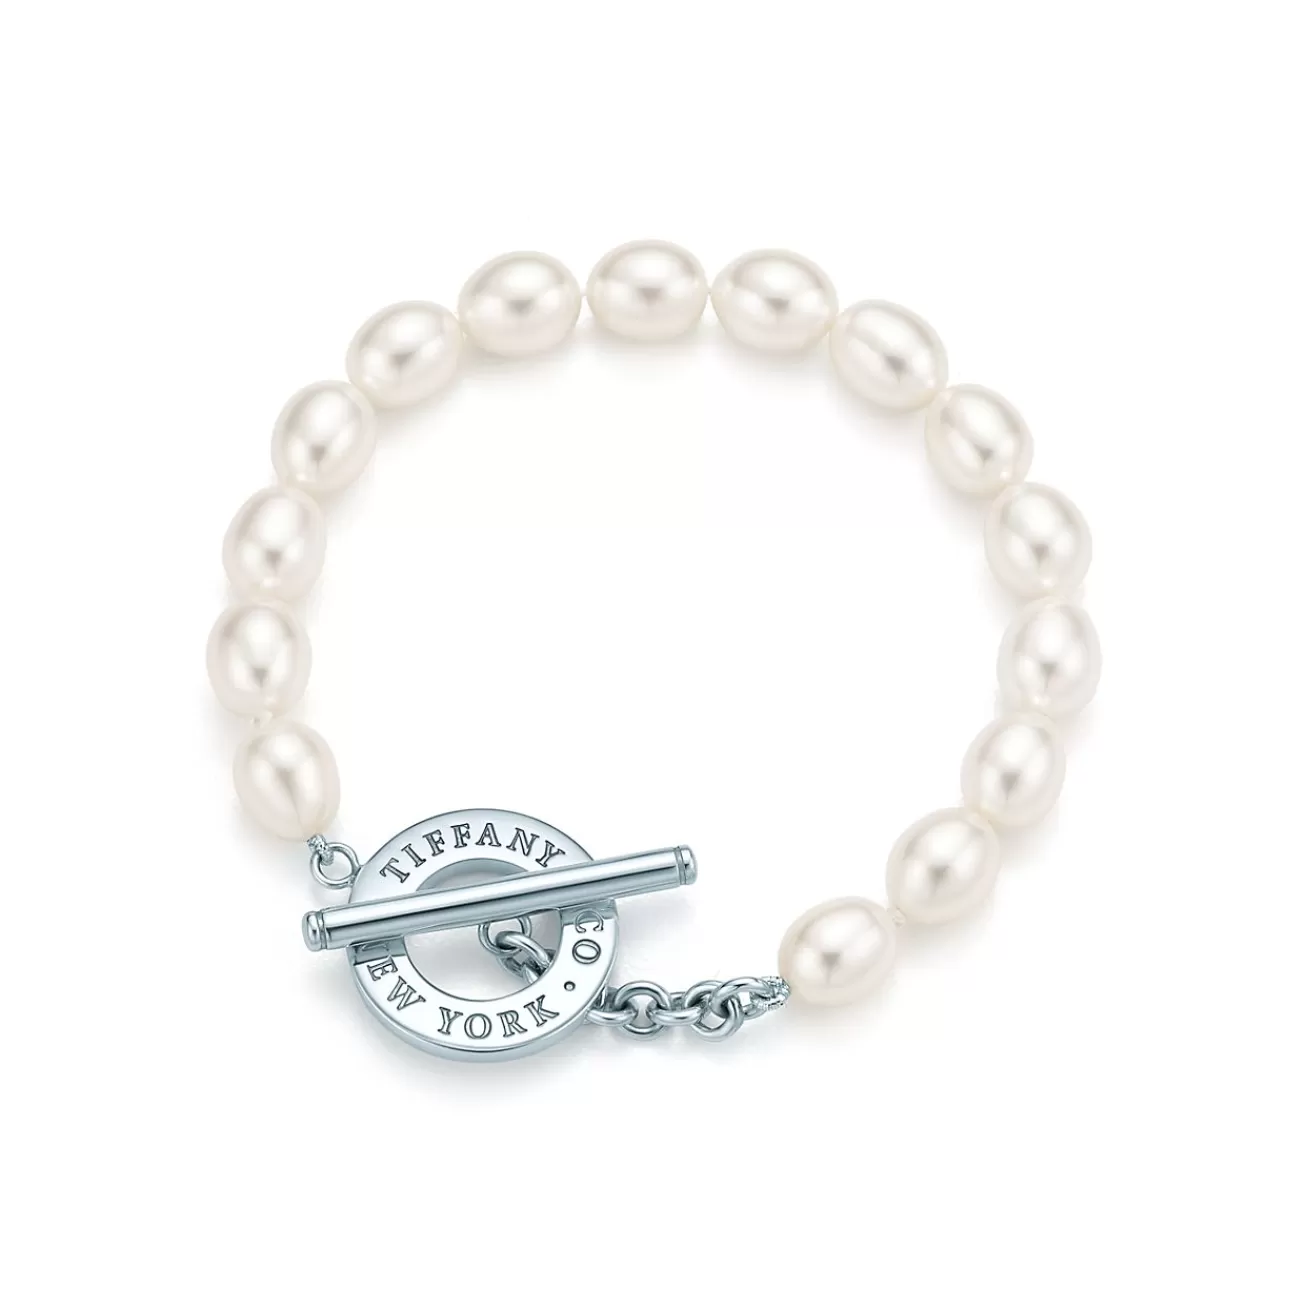 Tiffany & Co. Freshwater pearl toggle bracelet in sterling silver. | ^ Bracelets | Sterling Silver Jewelry